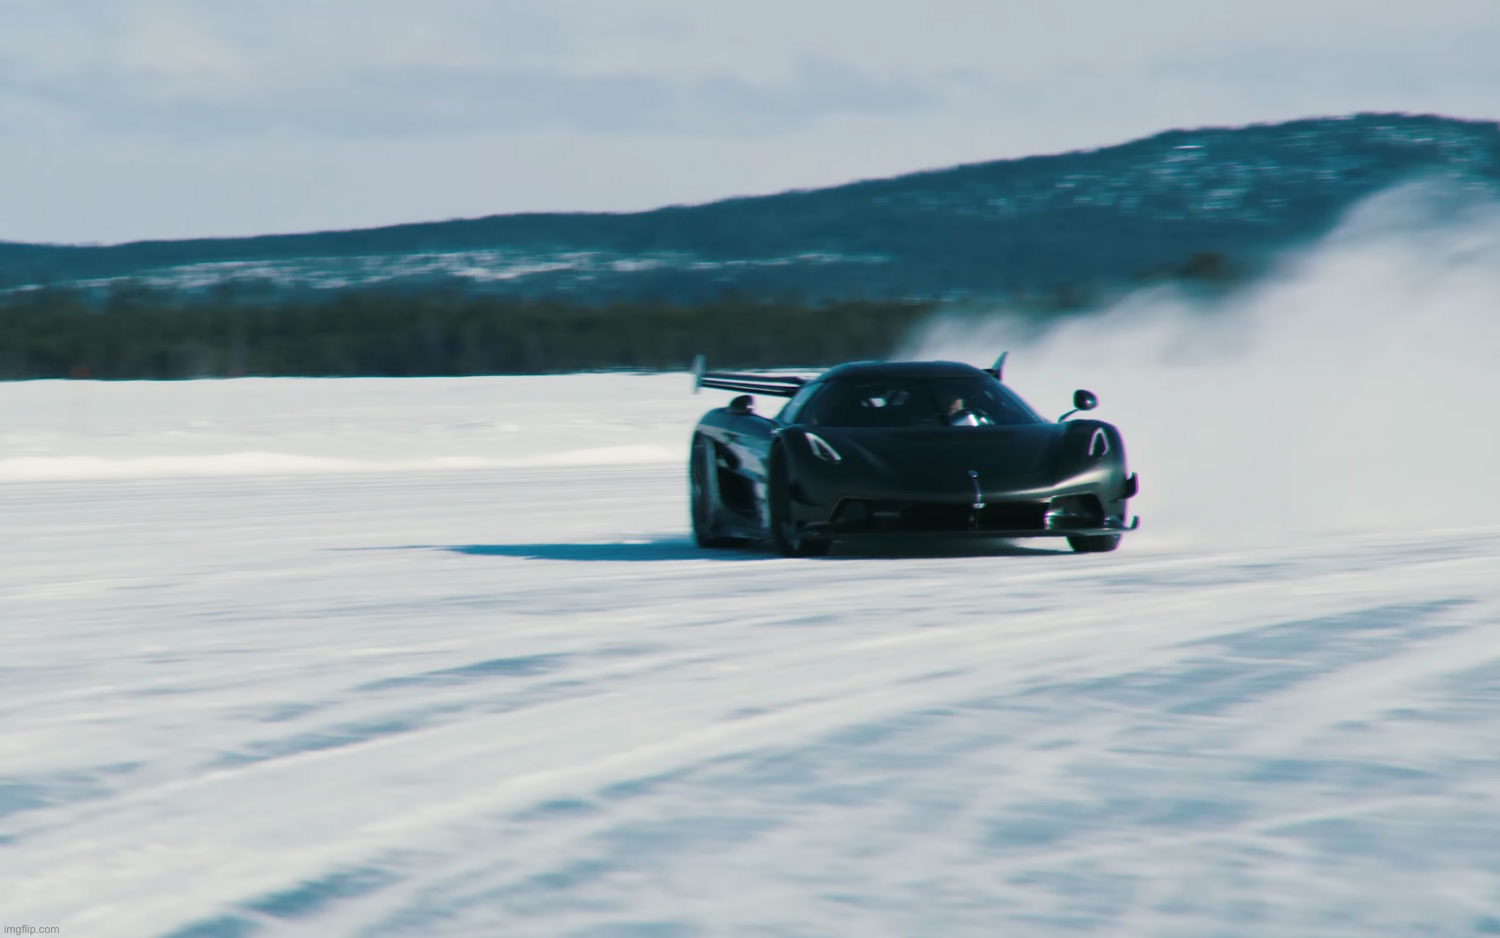 ah yes, drifting a 2.8 million dollar sports car in the snow | image tagged in unsubmitted images,cars,vroom vroom,drift,snow | made w/ Imgflip meme maker